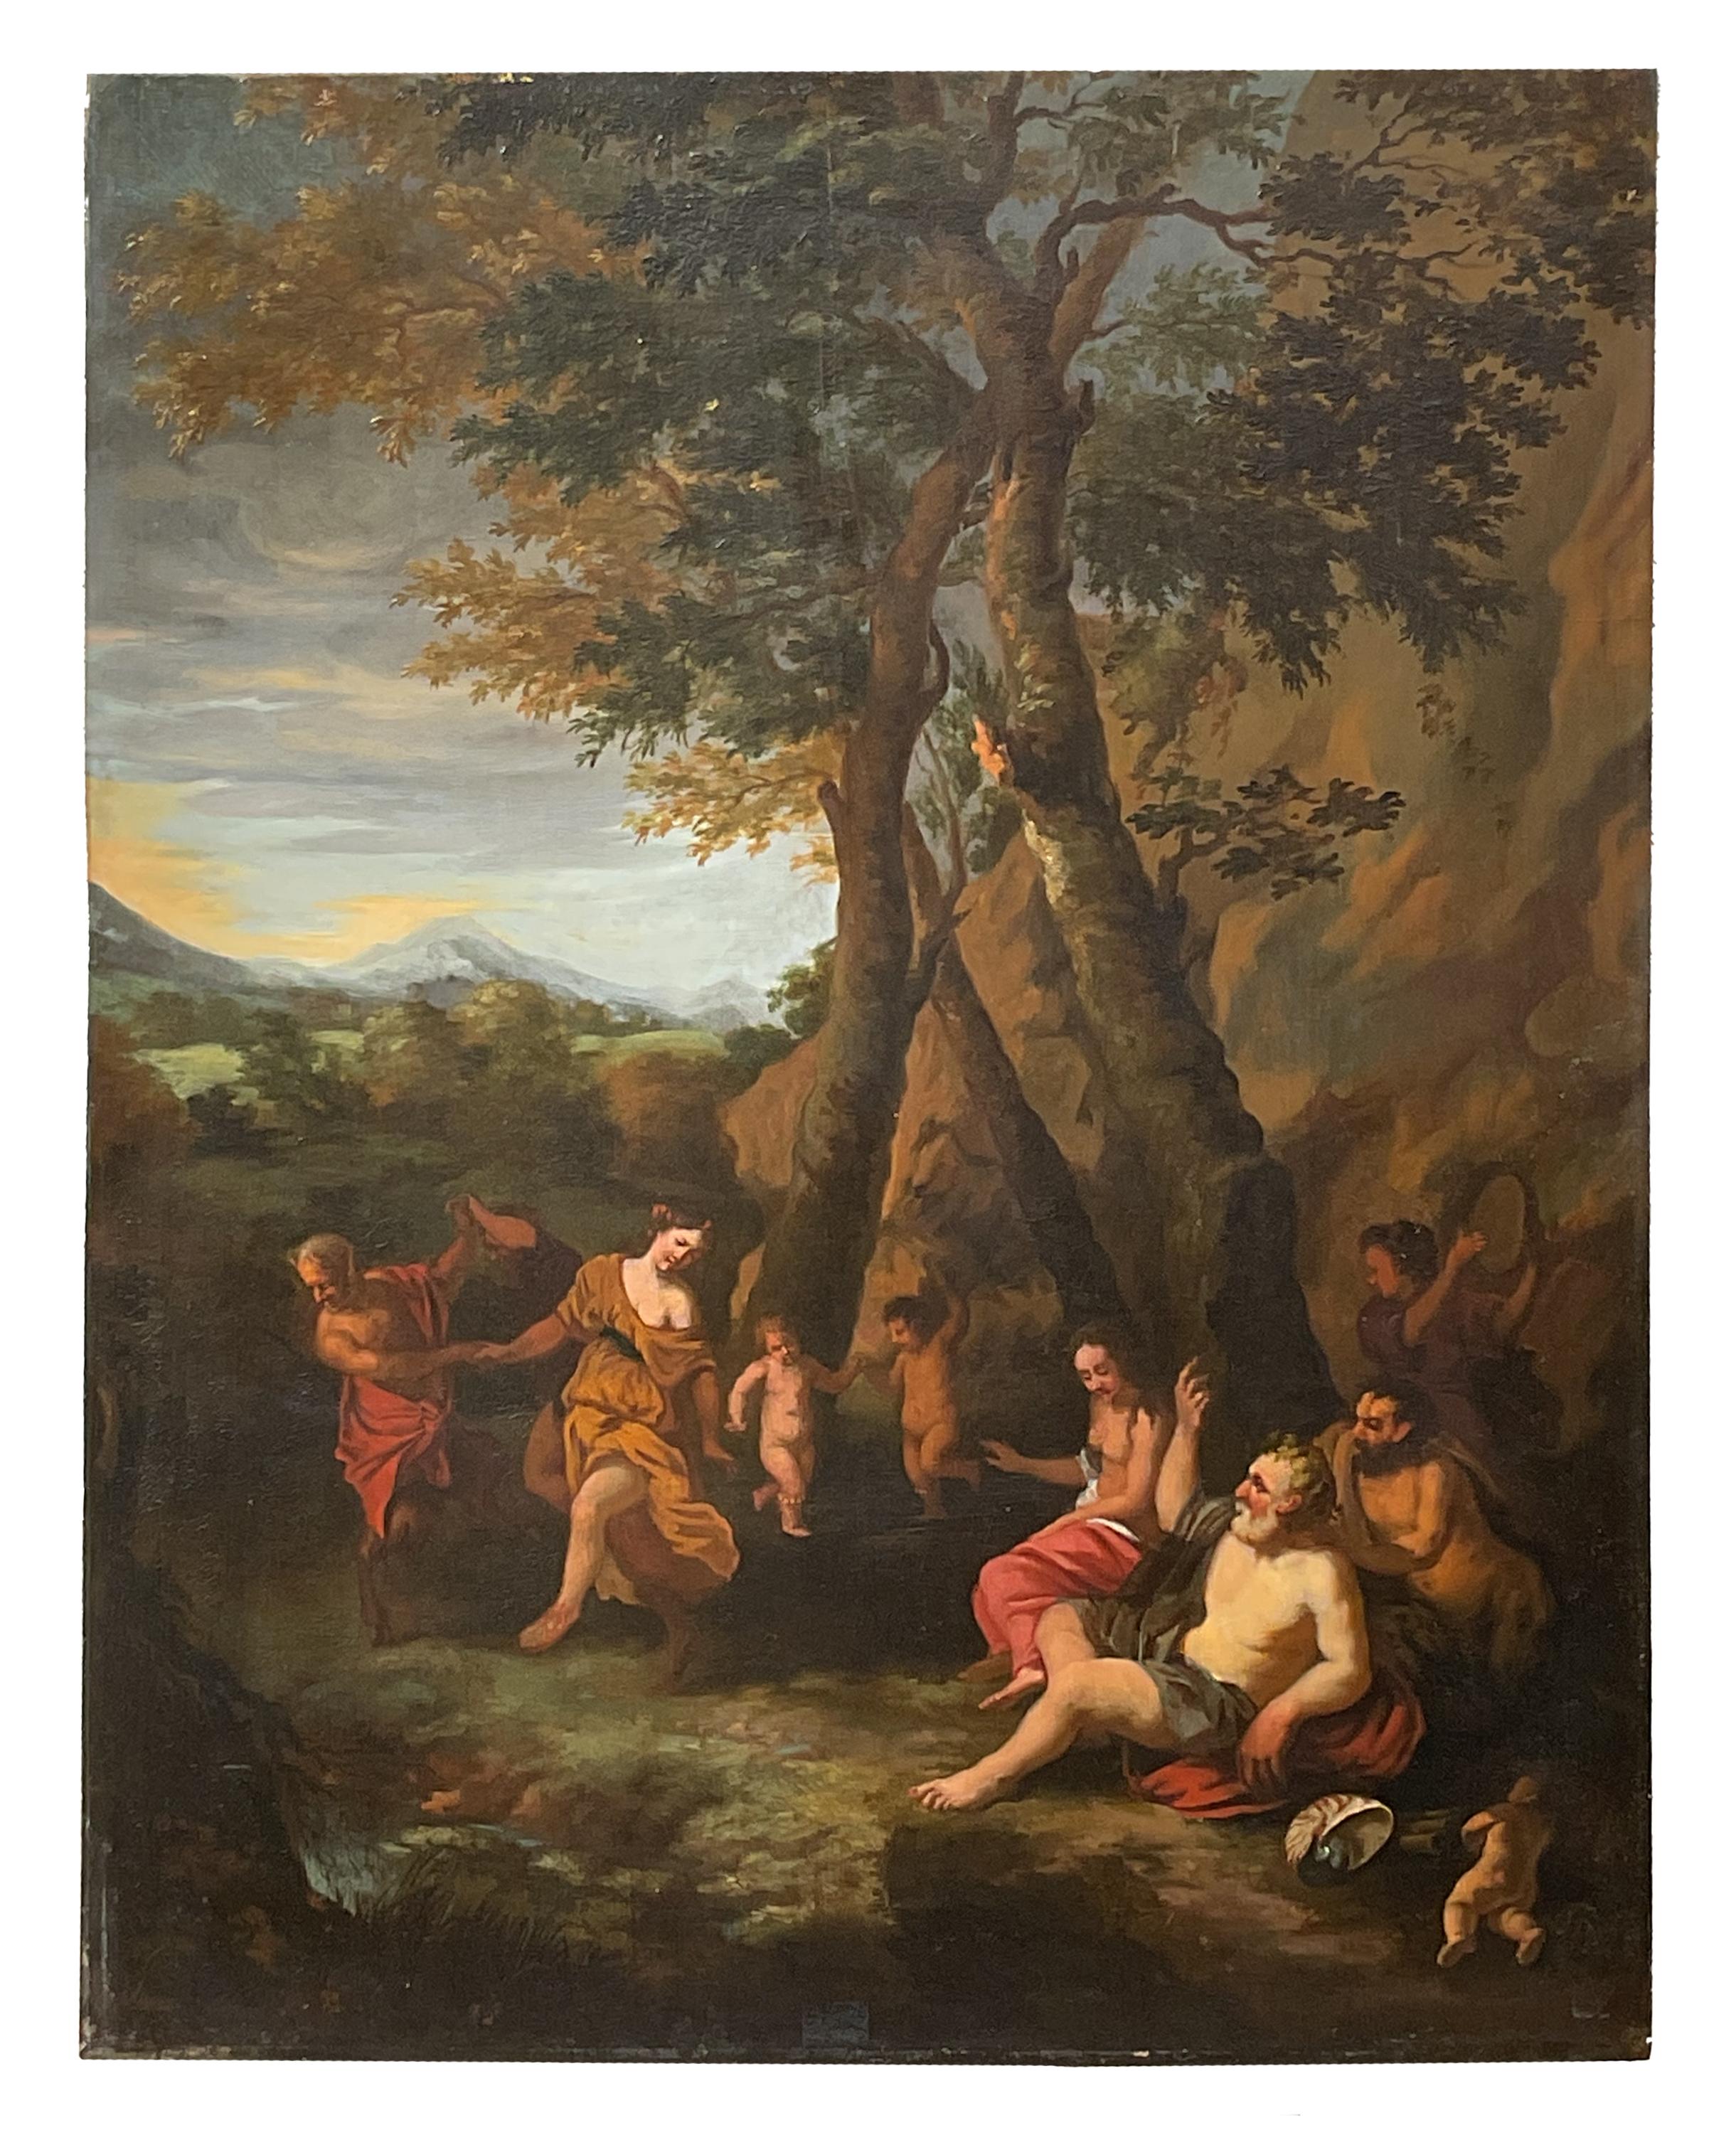 Gerard I Hoet (attributed)
(1648 – 1733)

Bacchanale
Oil on panel, 68×53.5 cm
Within gilded and carved wooden frame

The painting, an oil on panel in overall very good condition, depicts a bacchanal scene with a dance of satyrs, putti, and maidens